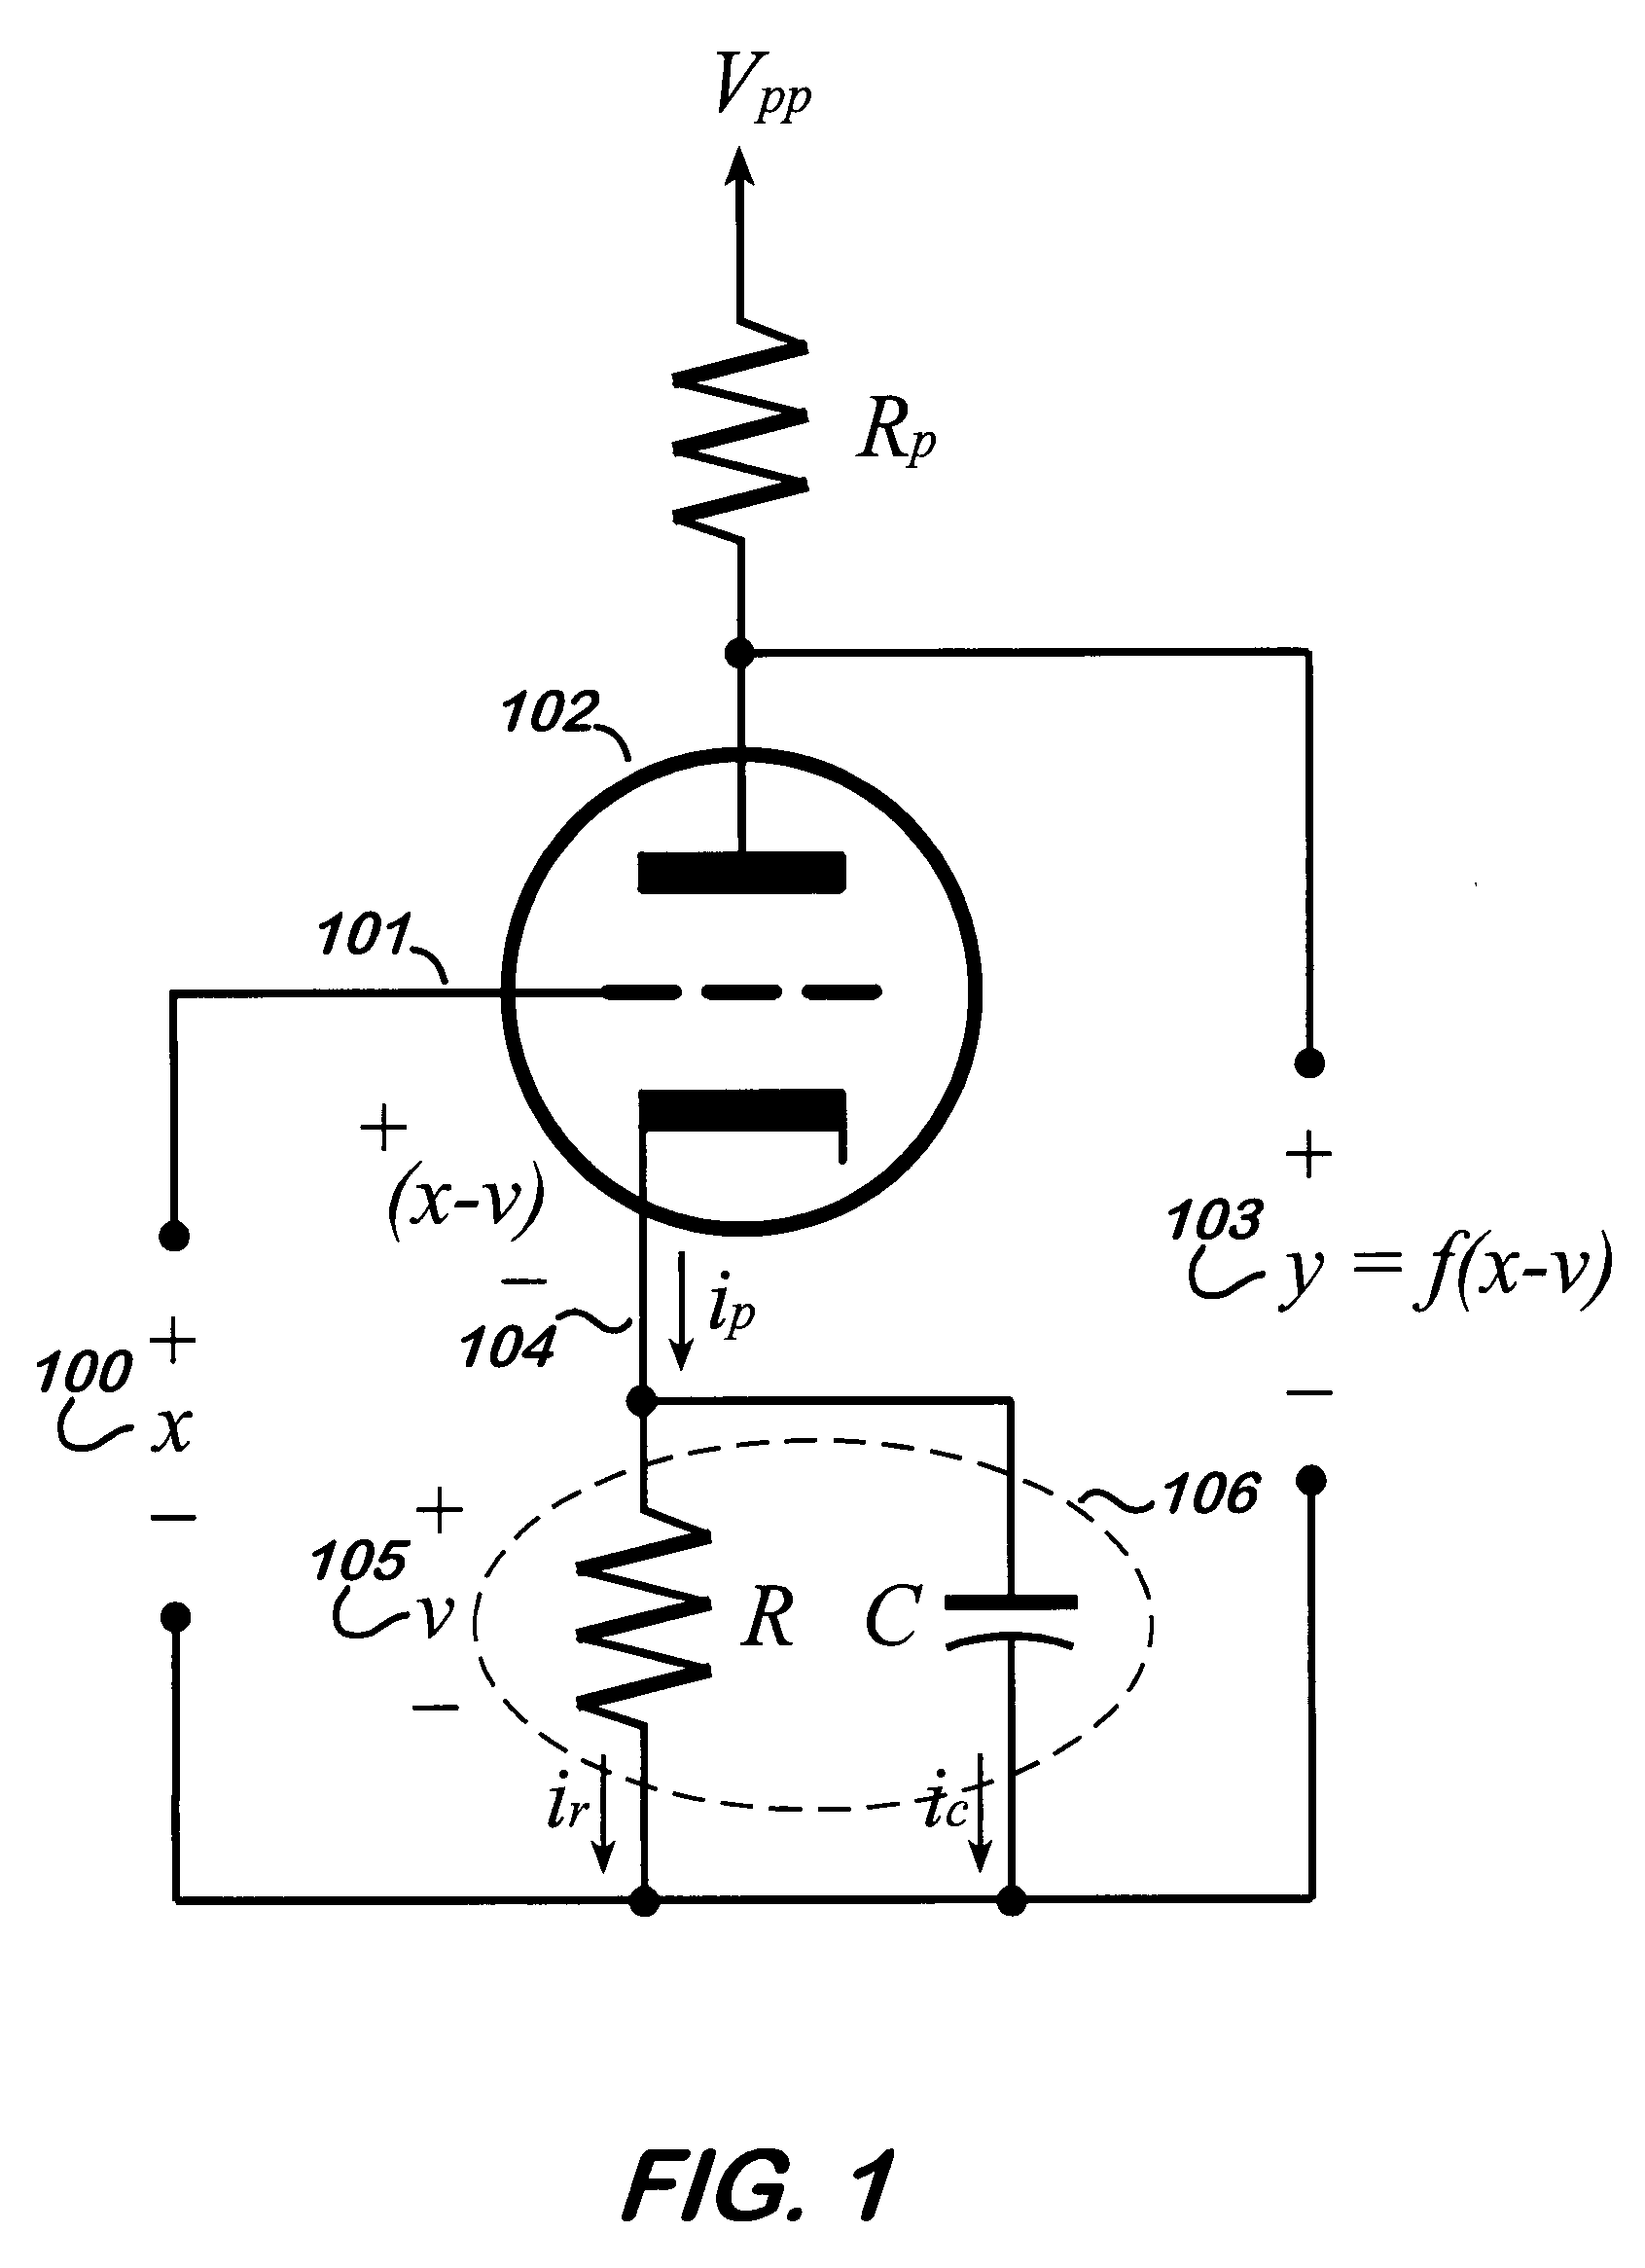 Method and apparatus for distortion of audio signals and emulation of vacuum tube amplifiers